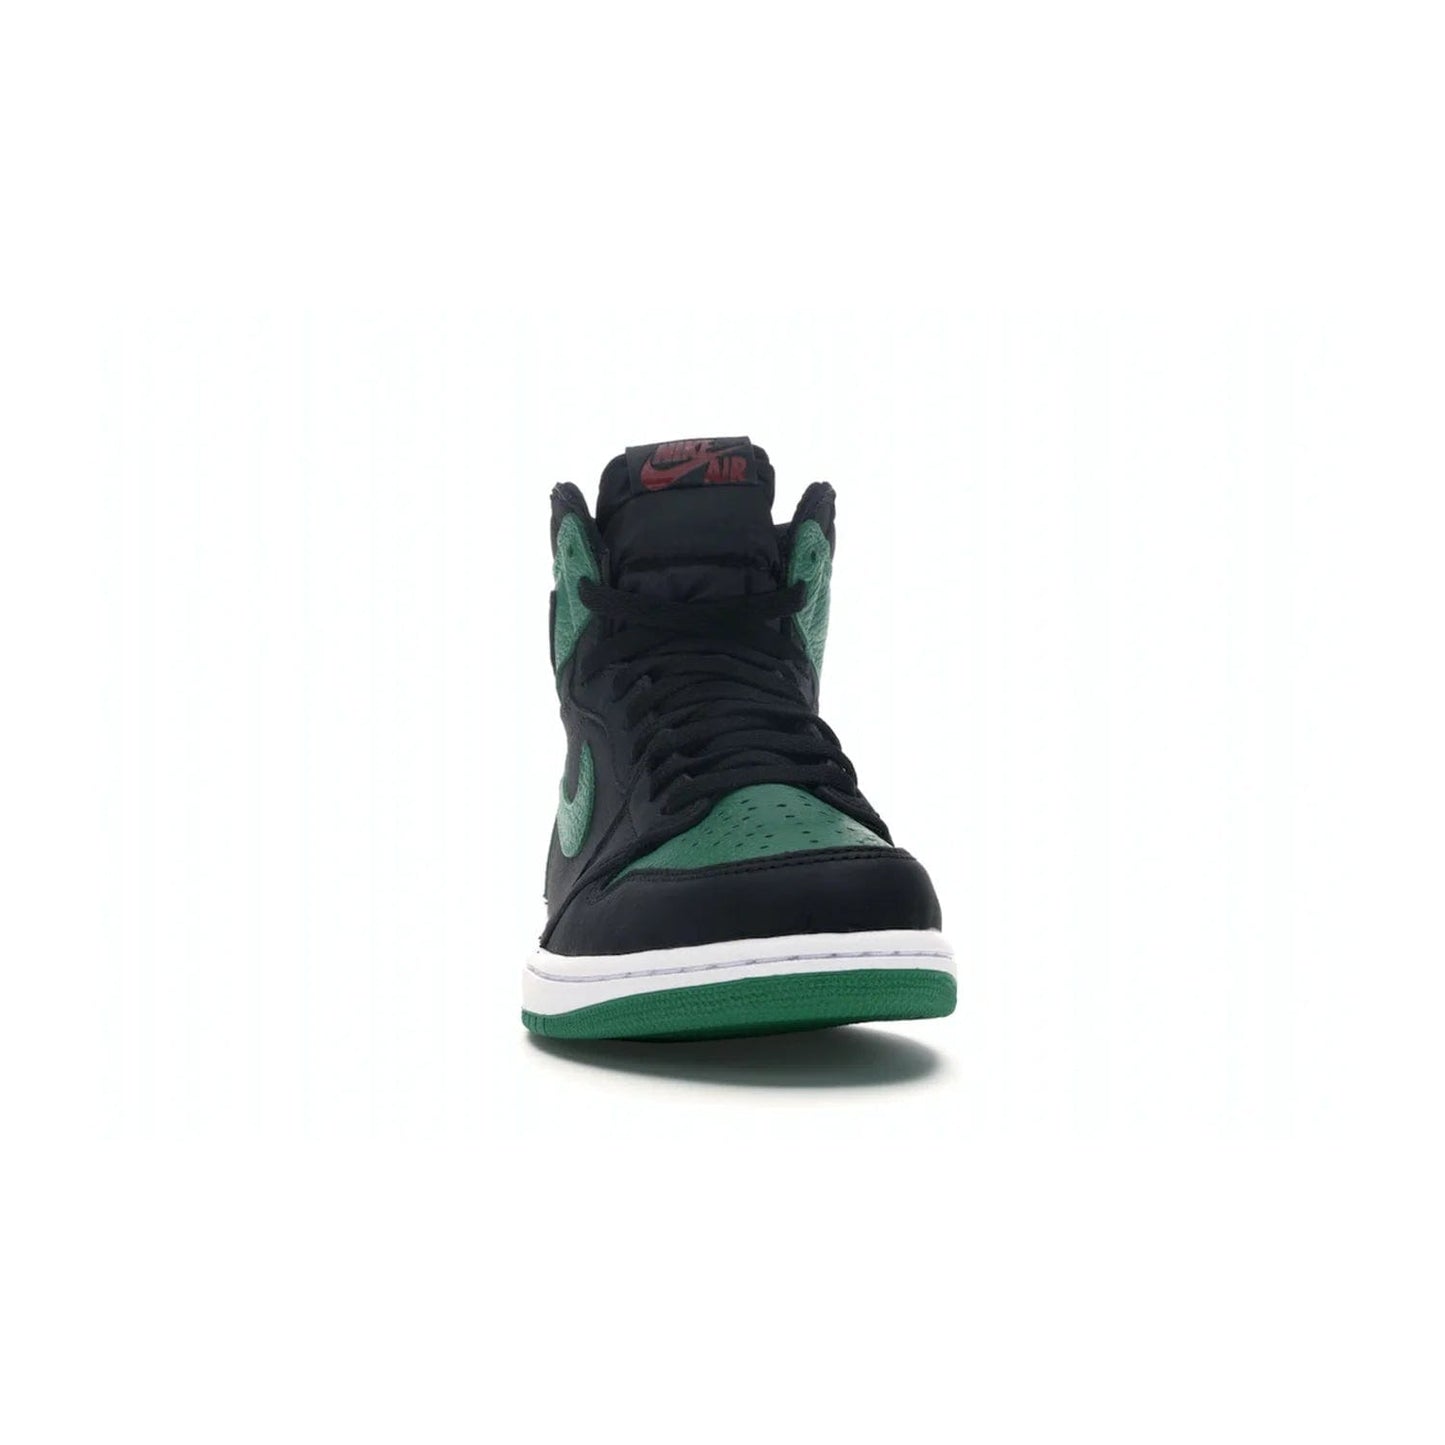 Jordan 1 Retro High Pine Green Black - Image 9 - Only at www.BallersClubKickz.com - Step into fresh style with the Jordan 1 Retro High Pine Green Black. Combining a black tumbled leather upper with green leather overlays, this sneaker features a Gym Red embroidered tongue tag, sail midsole, and pine green outsole for iconic style with a unique twist.